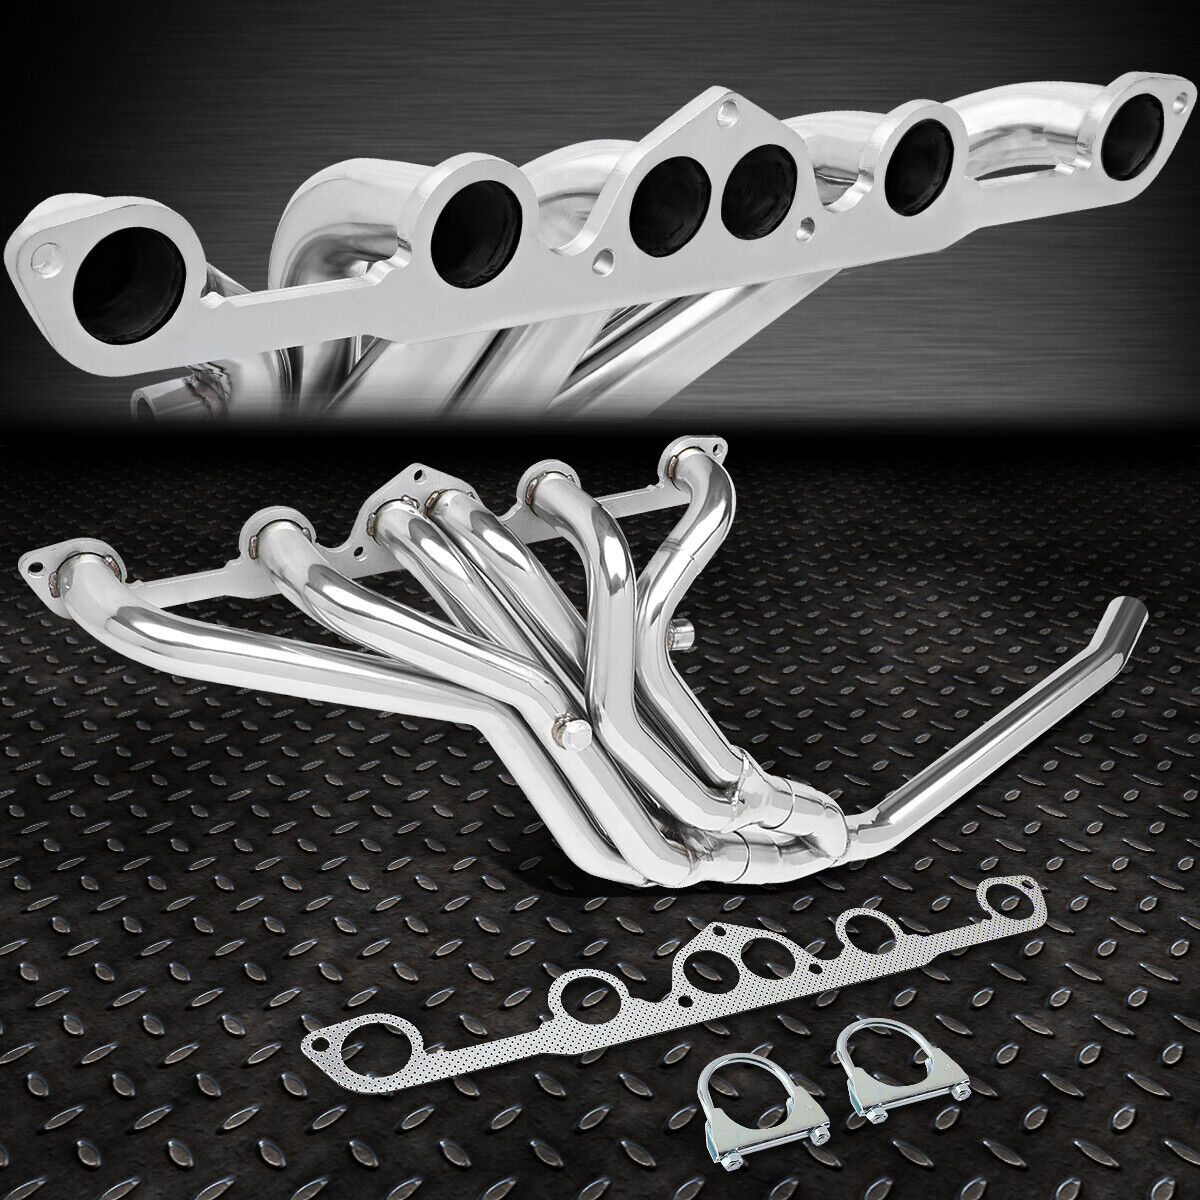 FOR 77-83 DATSUN 280Z/280ZX 2.8L NON TURBO MID LENGTH EXHAUST HEADER MANIFOLD US